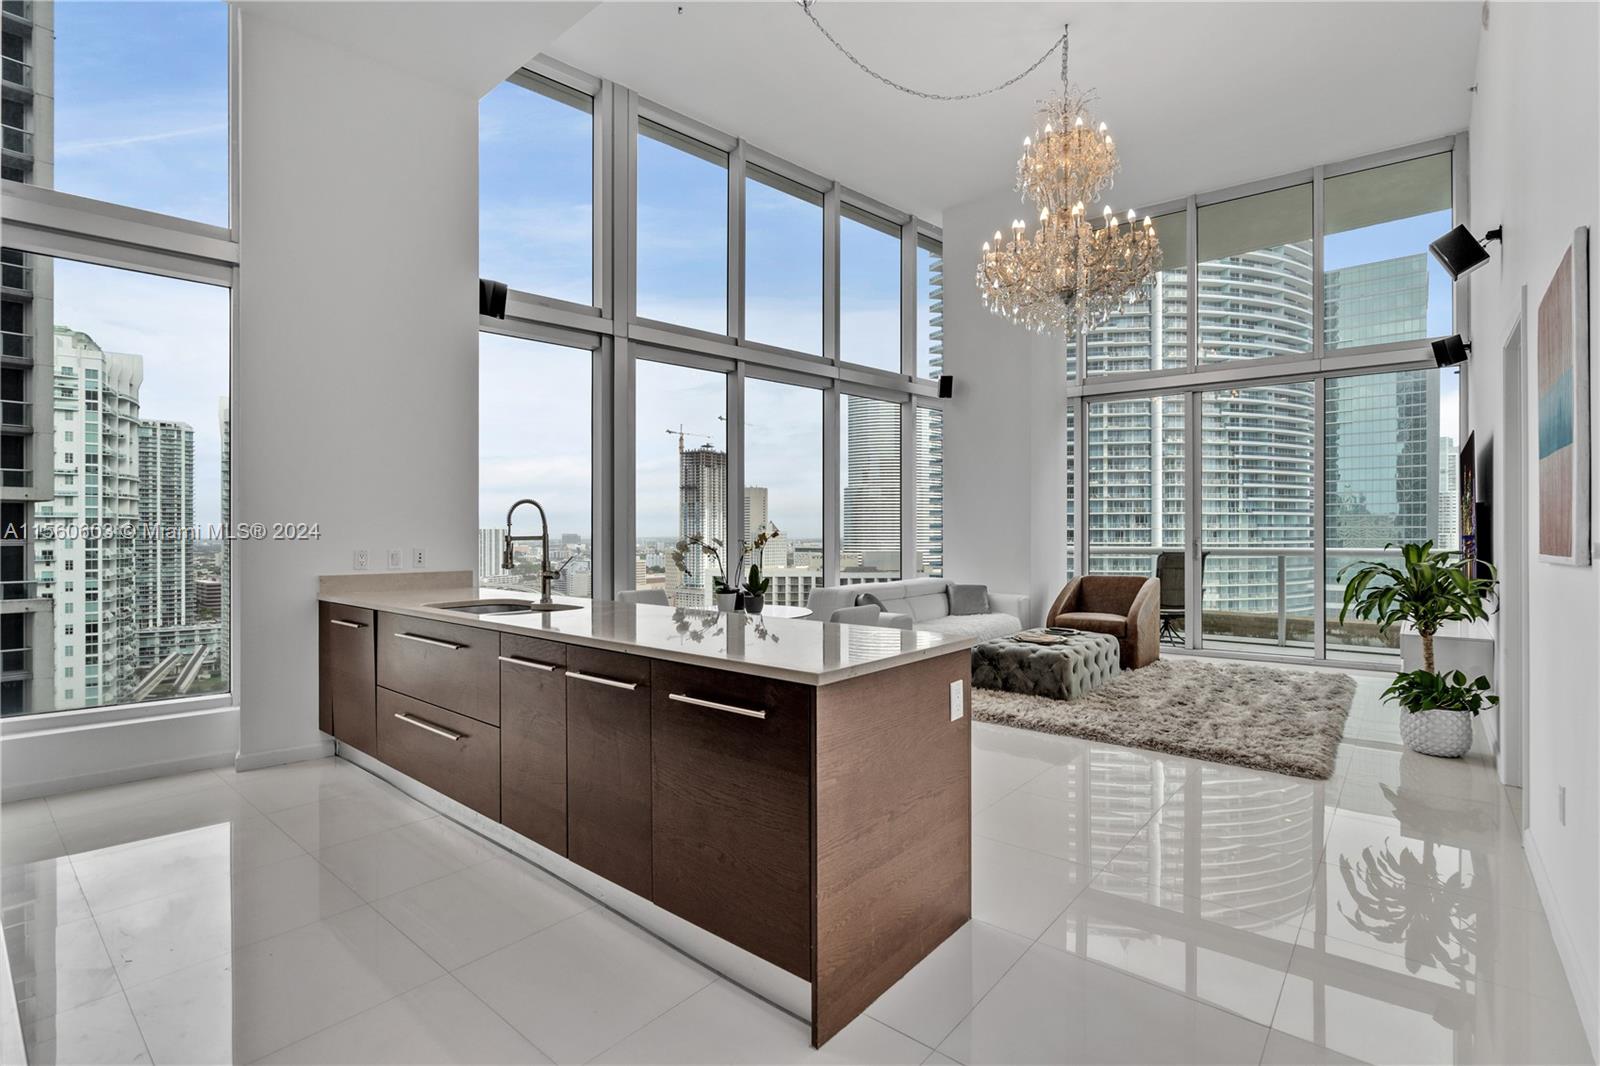 SPACIOUS, LIGHT FILLED FULLY FURNISHED CORNER UNIT, 2 BED 2 BATH. UNIQUE UNIT WITH BEAUTIFUL VIEW
FROM THE 28TH FLOOR OF THE BAY & OF DOWNTOWN MIAMI. CEILING IS ALMOST 13' IN HEIGHT, DOUBLE
HEIGHT CEILINGS. APARTMENT EQUIPPED WITH TOP OF THE LINE APPLIANCES ,NEST THERMOSTAT &
MOTORIZED REMOTE CONTROLLED BLINDS IN THE APARTMENT . BUILDING OFFERS TOP OF THE LINE AMENITIES
LIKE BAR, EXCERCISE ROOM, PLAY AREA, SAUNA, SPA, HOT TUB, POOL & MUCH MORE.